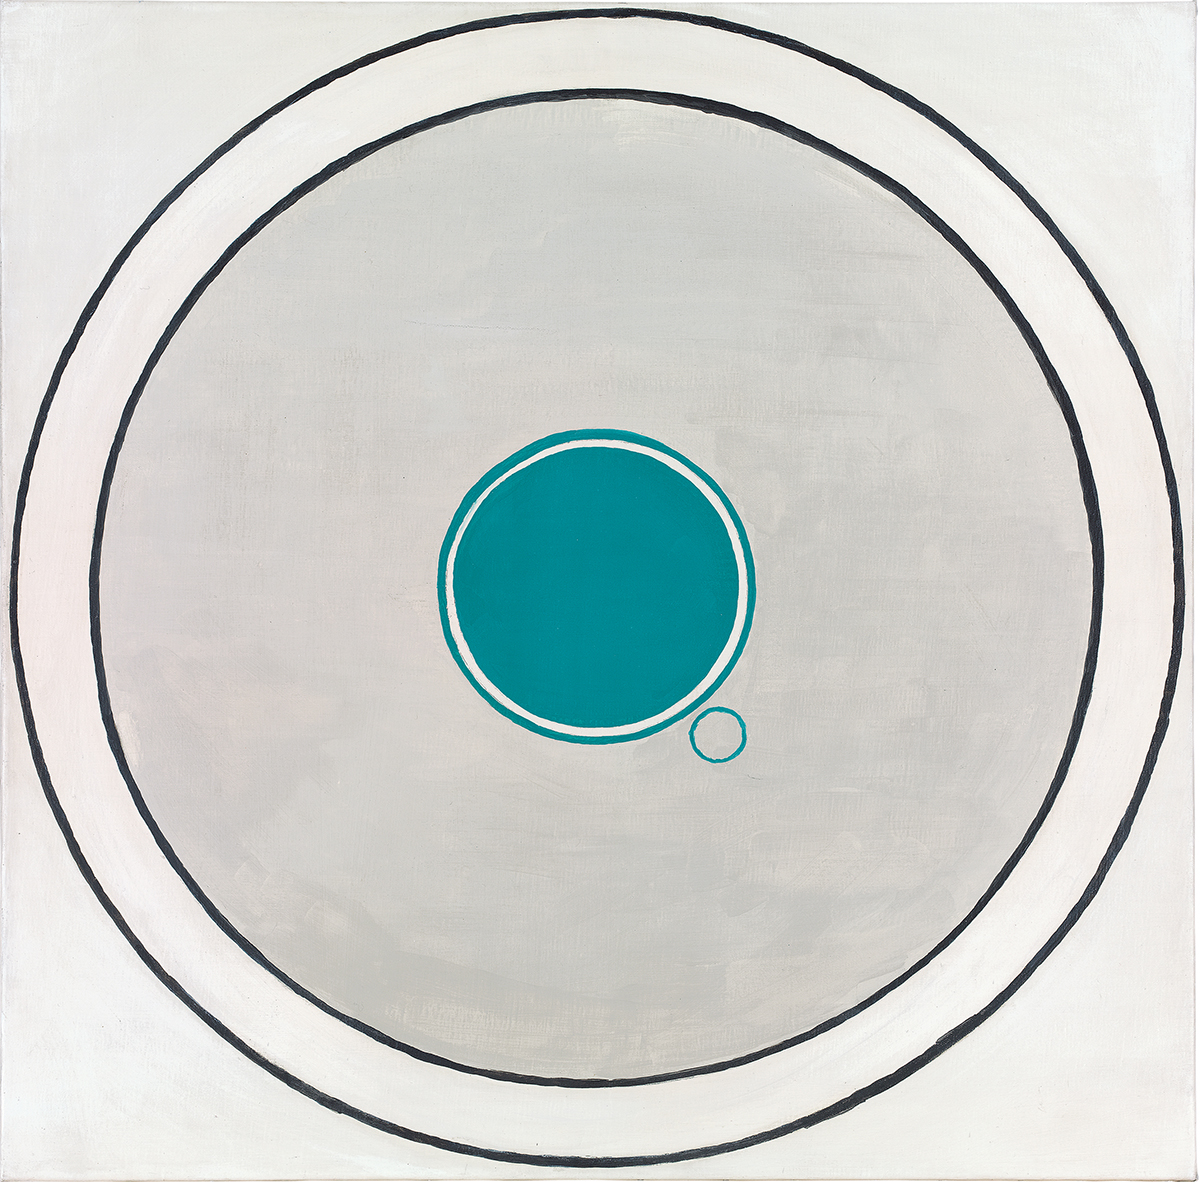 Painting of a target with blue centre